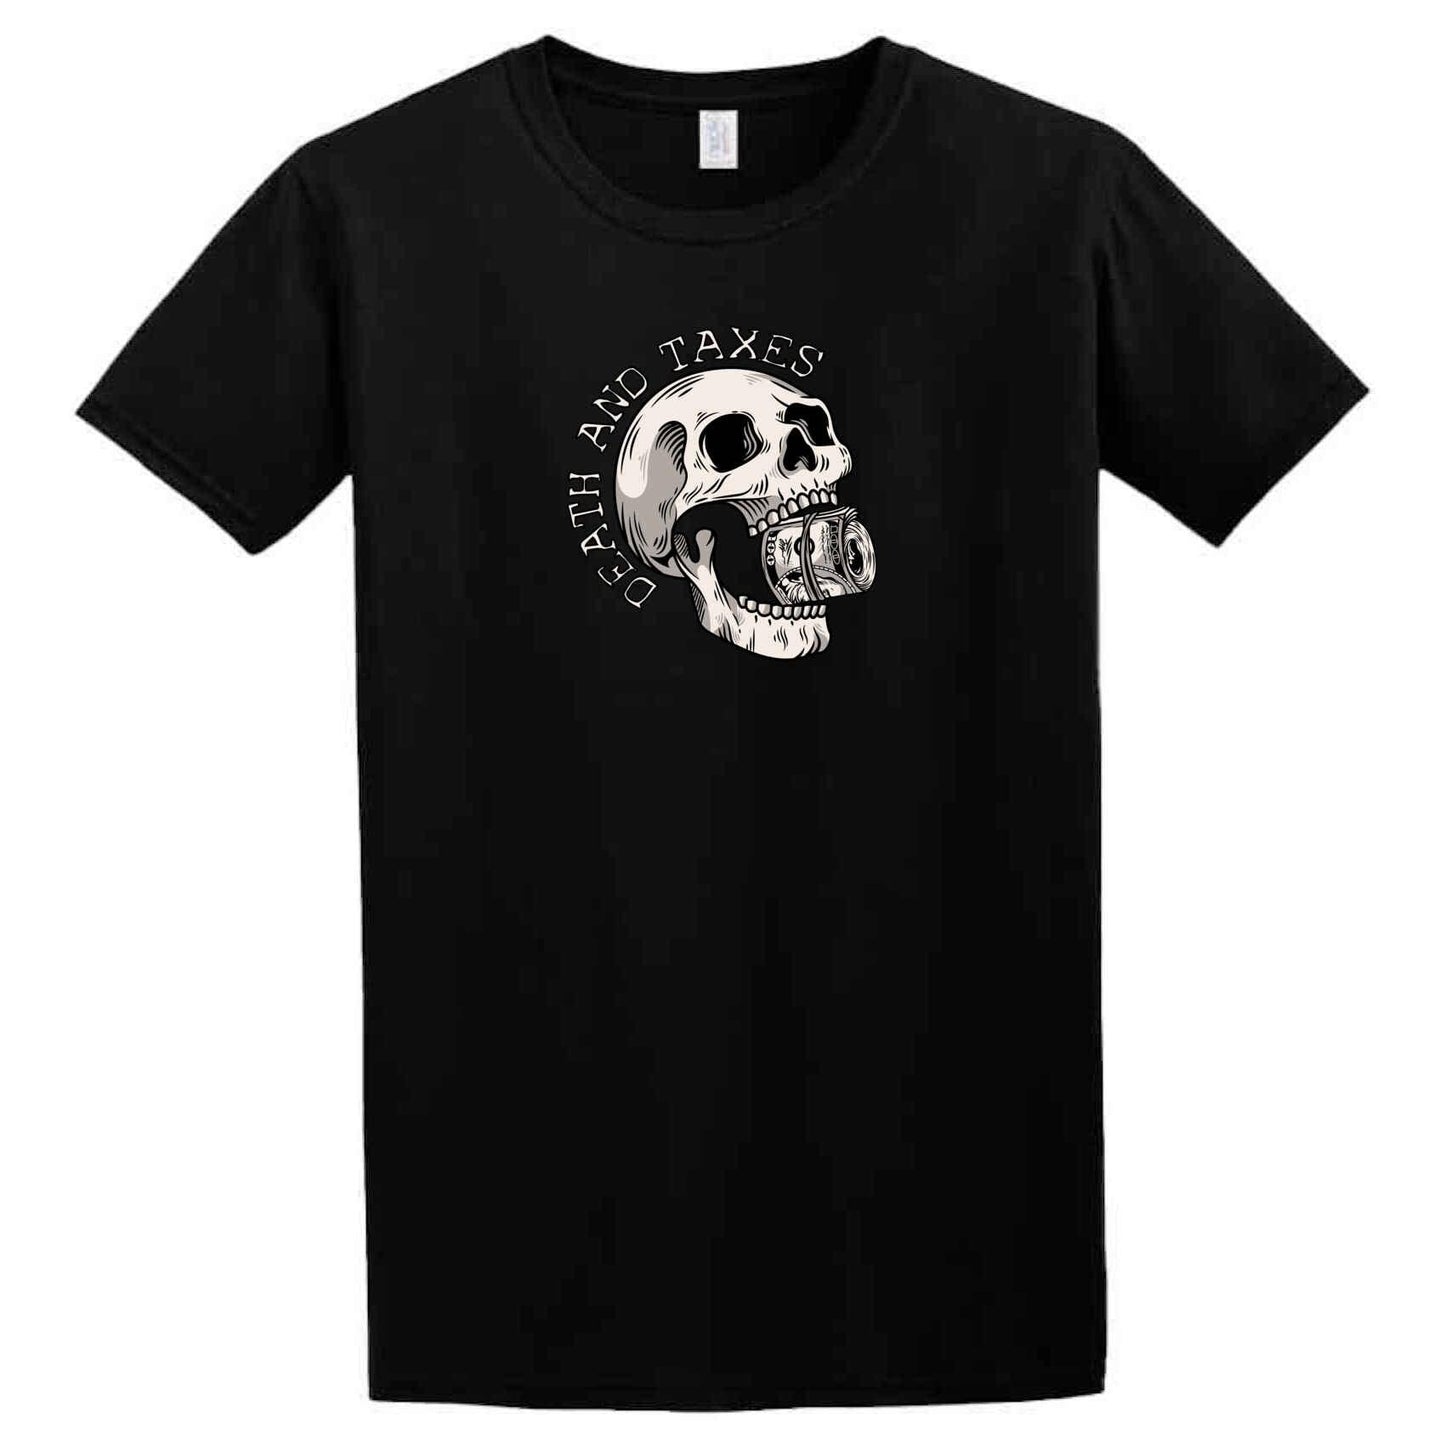 A Death And Taxes Twisted Gifts T-Shirt with a skull on it.